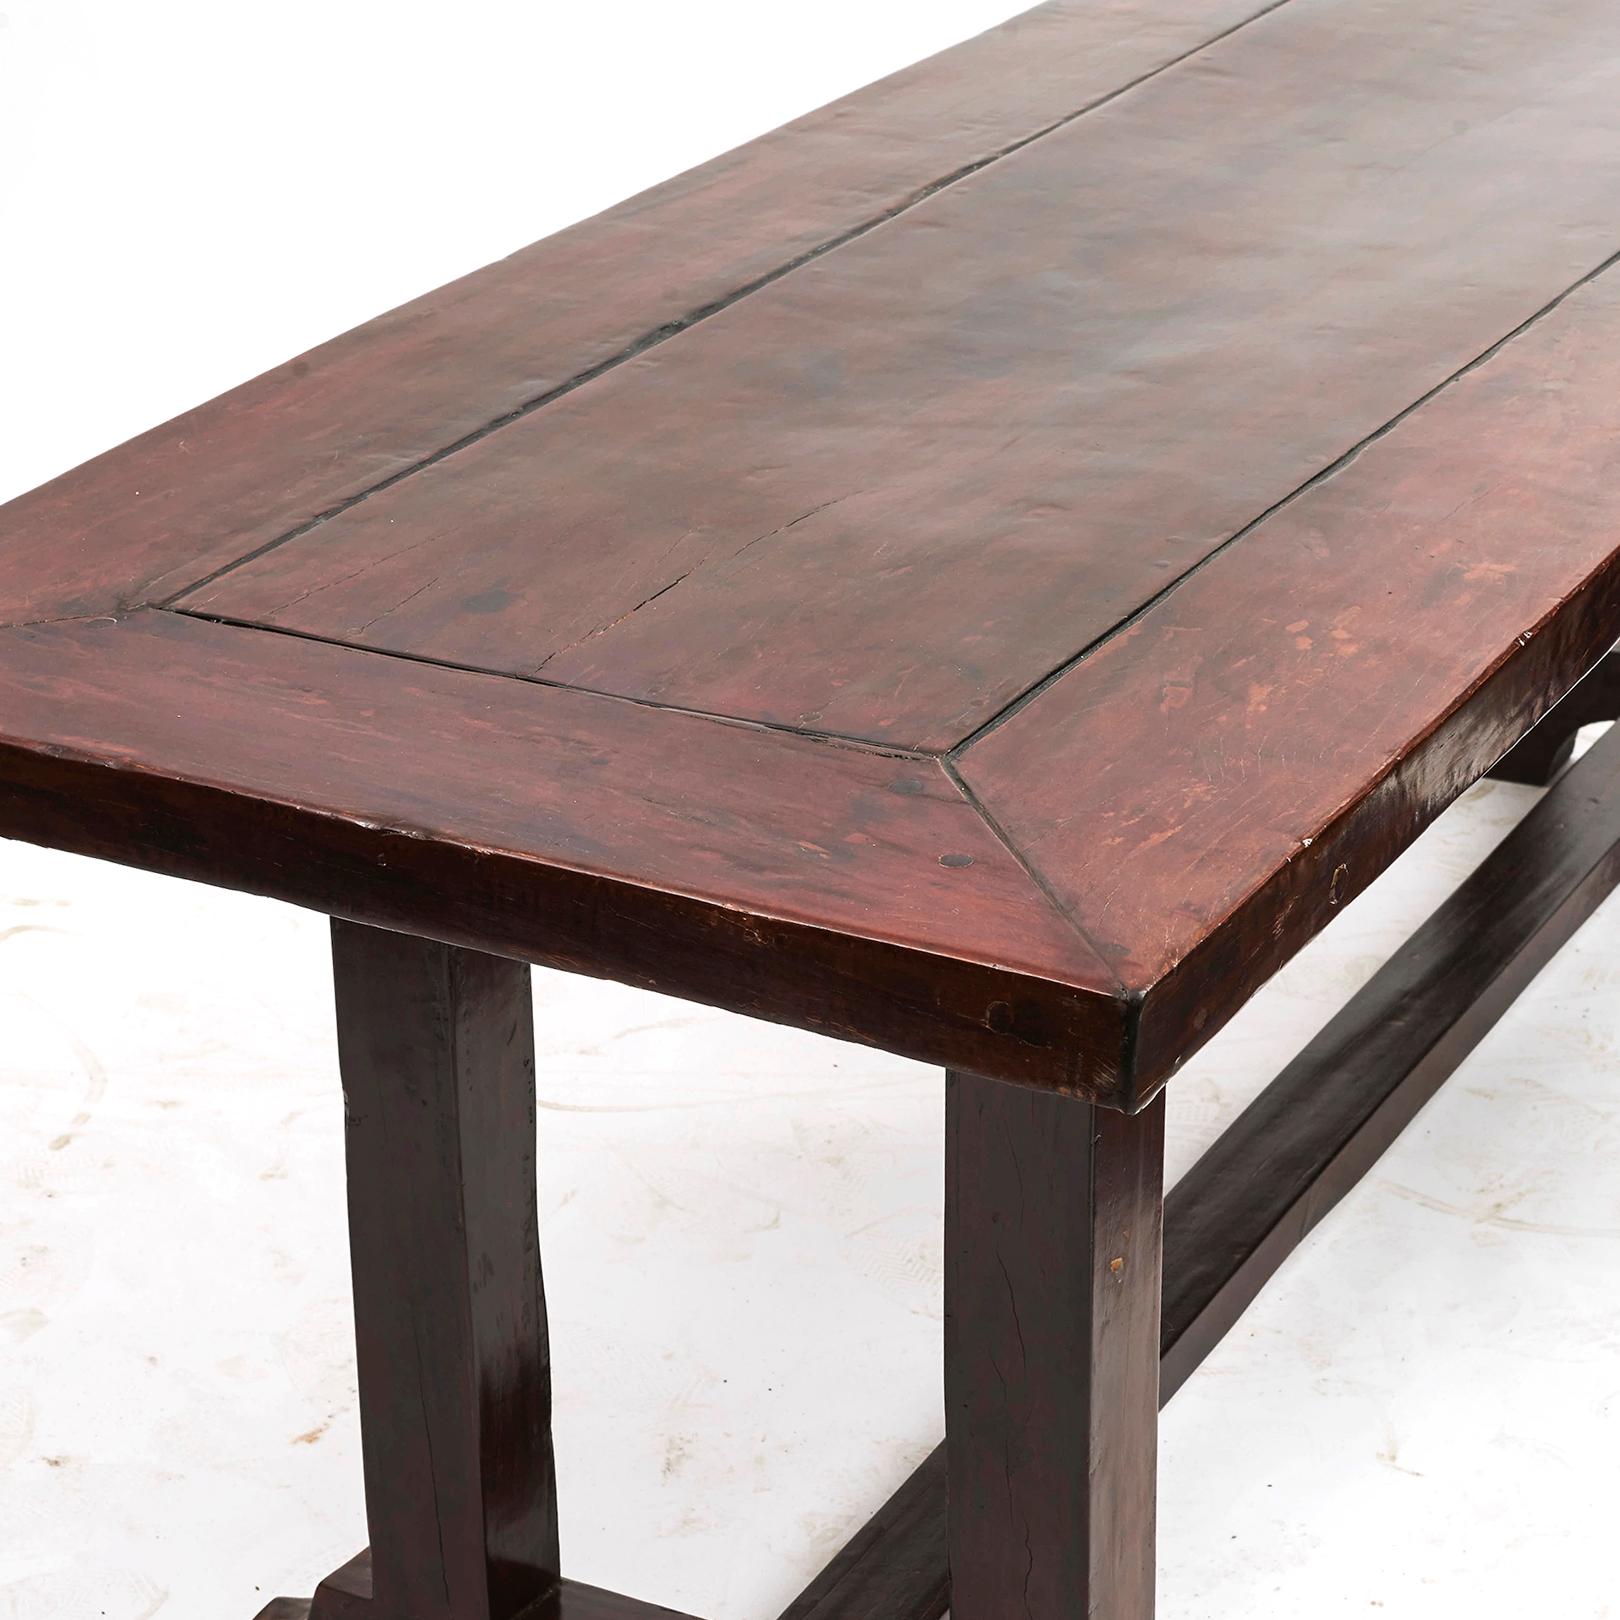 Long Spanish-colonial dining table made of molave hardwood, a tropical hardwood type.

Tabletop is made of one piece of wood bordered by a thick frame. Square legs and trestle base.
The table has a naturally beautiful patina and finish,